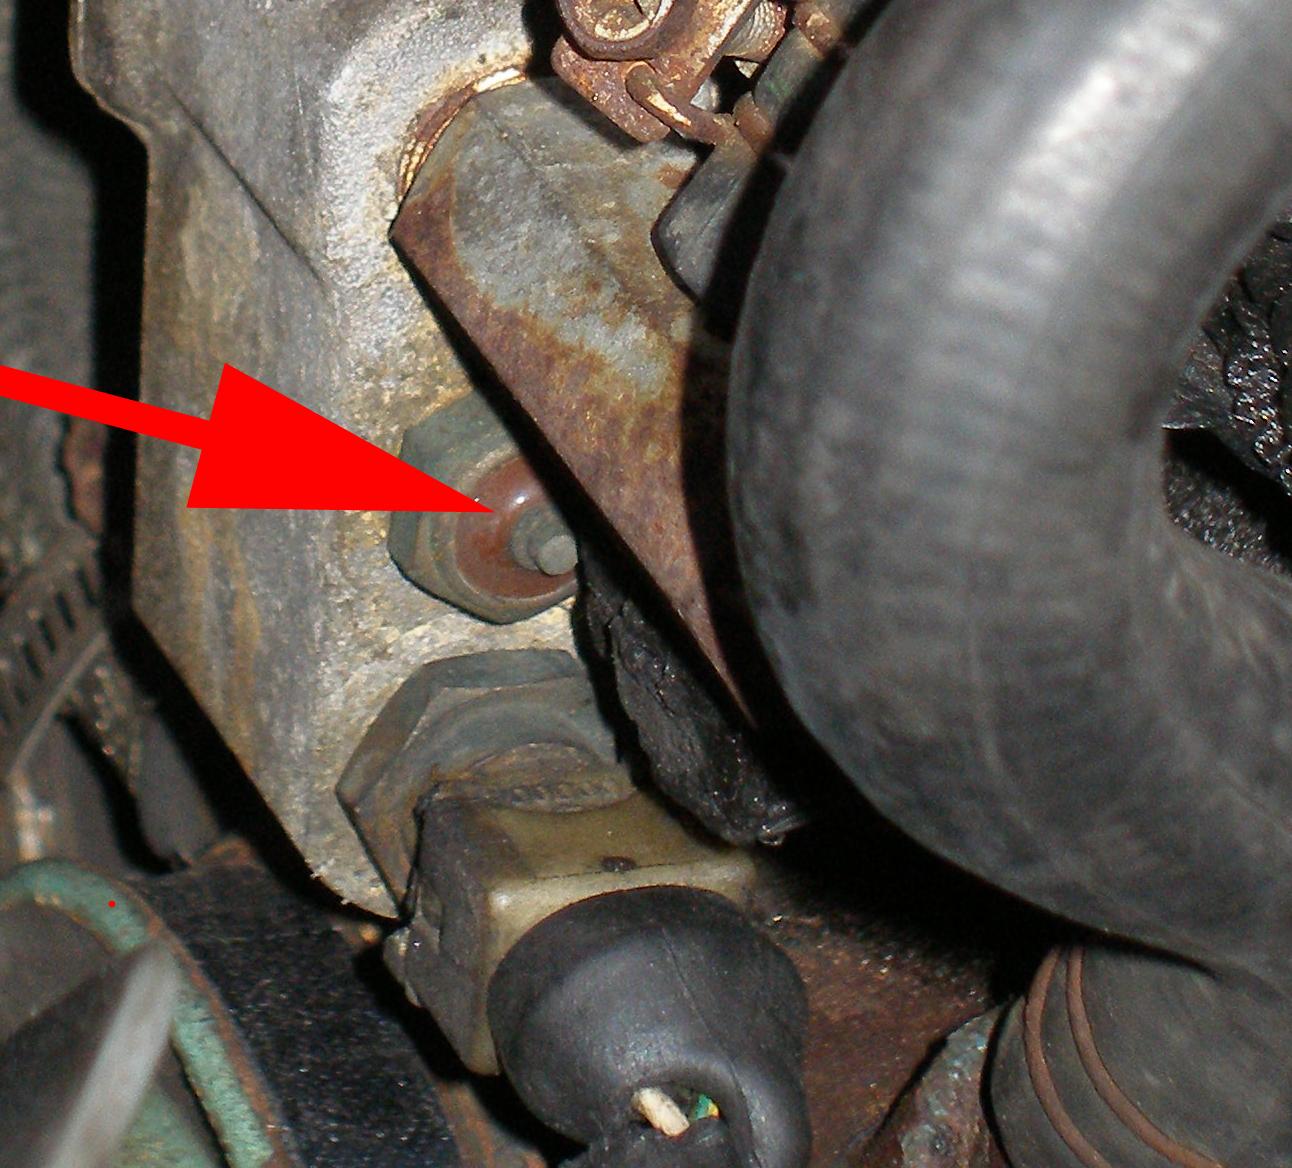 NissanDiesel forums • View topic Overheat coolant SD25